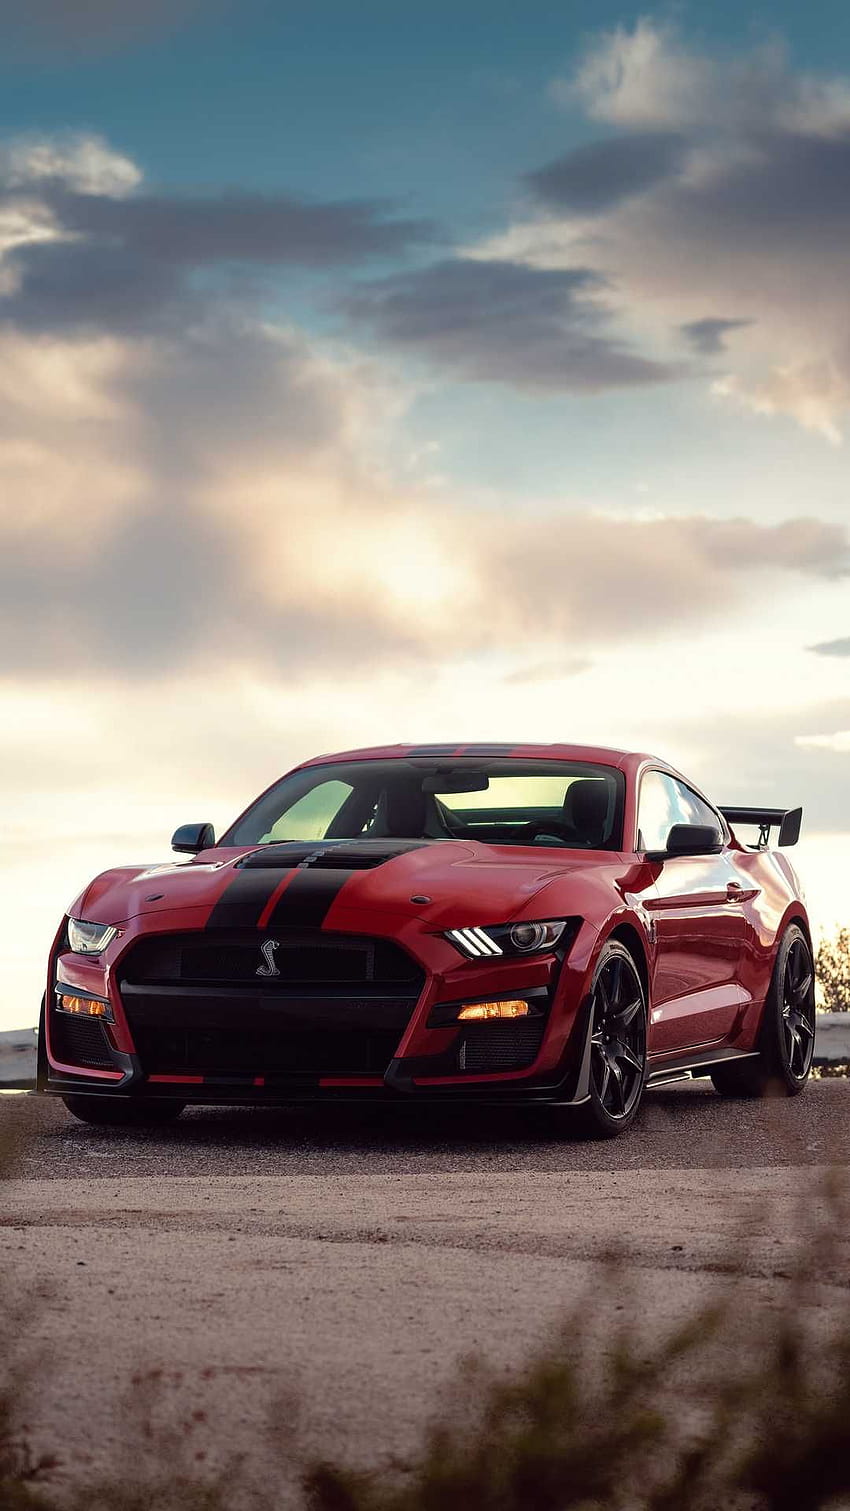 New, 2020 Ford Mustang Shelby GT500, red front angle, 2020 ford mustang gt500 iphone HD phone wallpaper